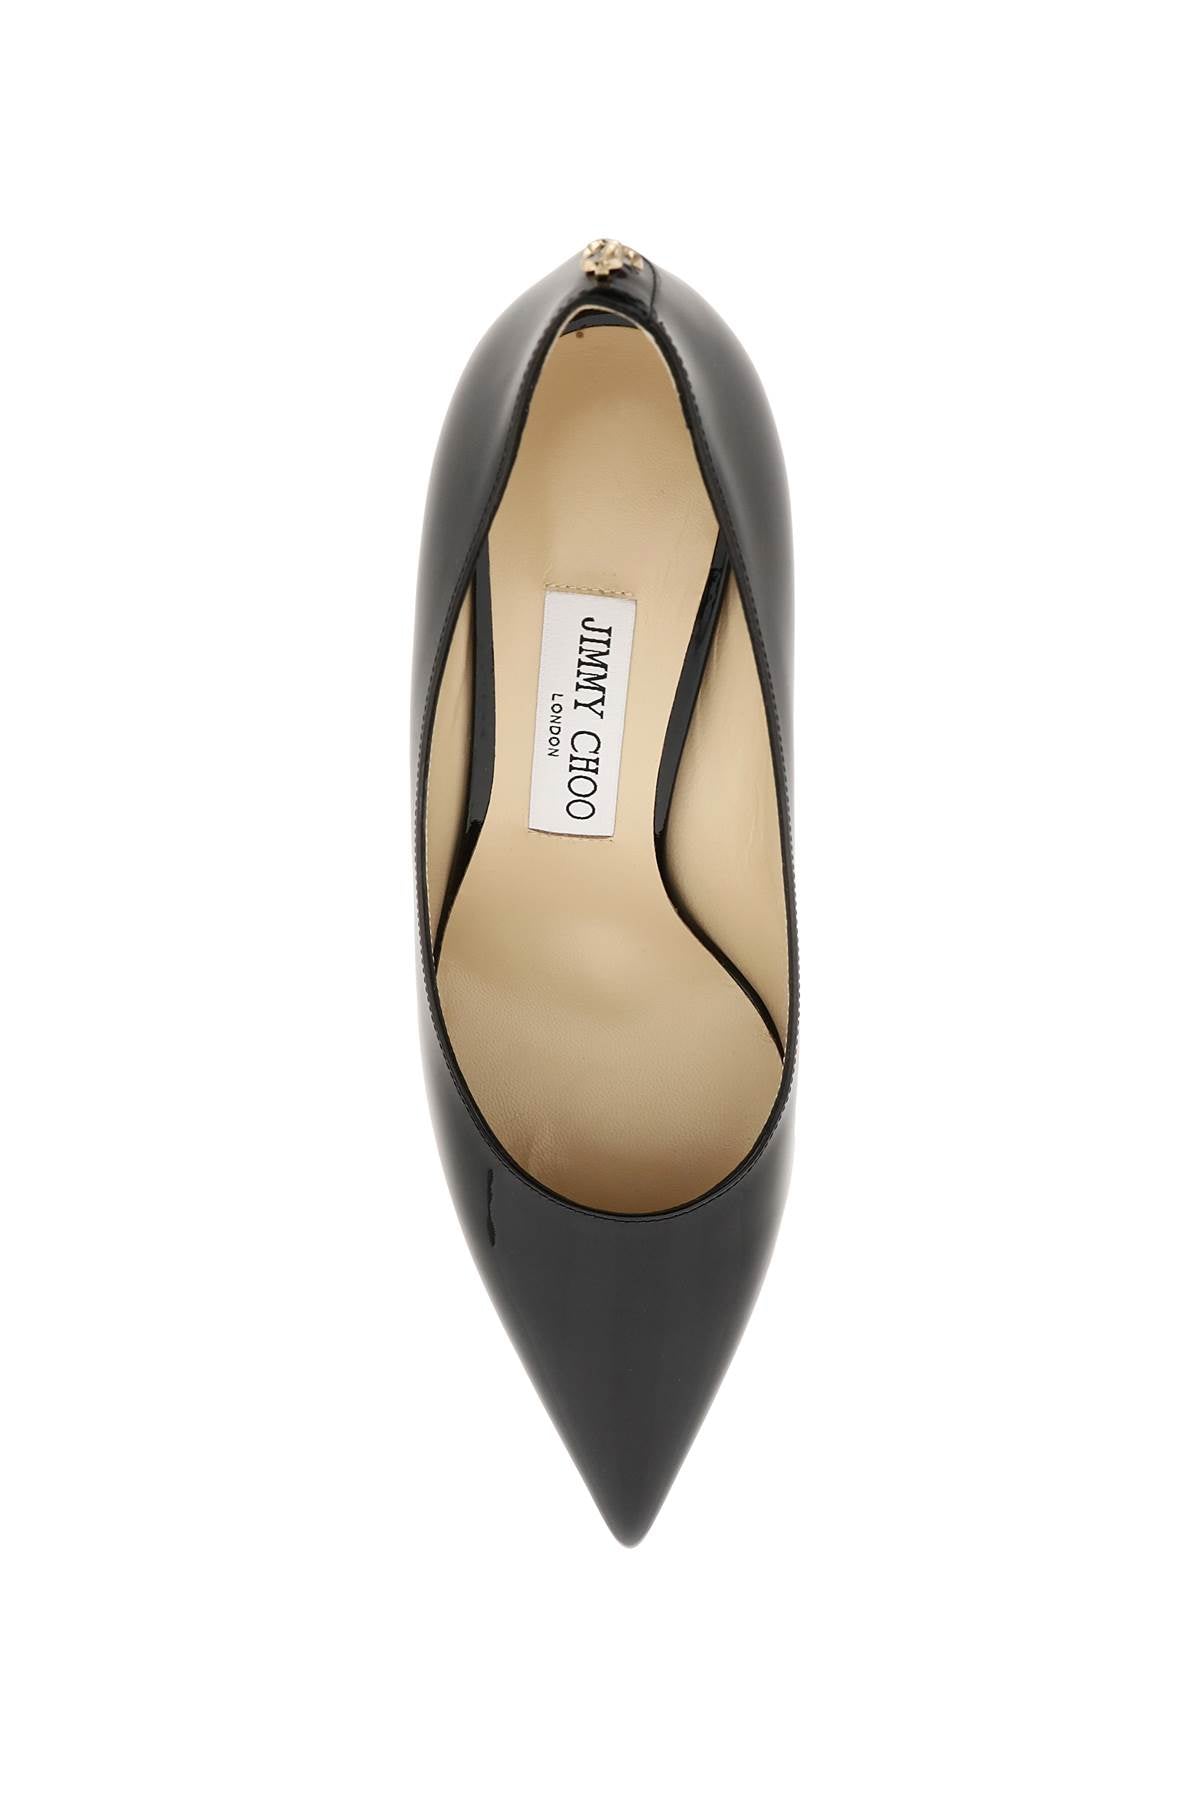 JIMMY CHOO Stylish and Chic Love Pumps in Classic Black for Women